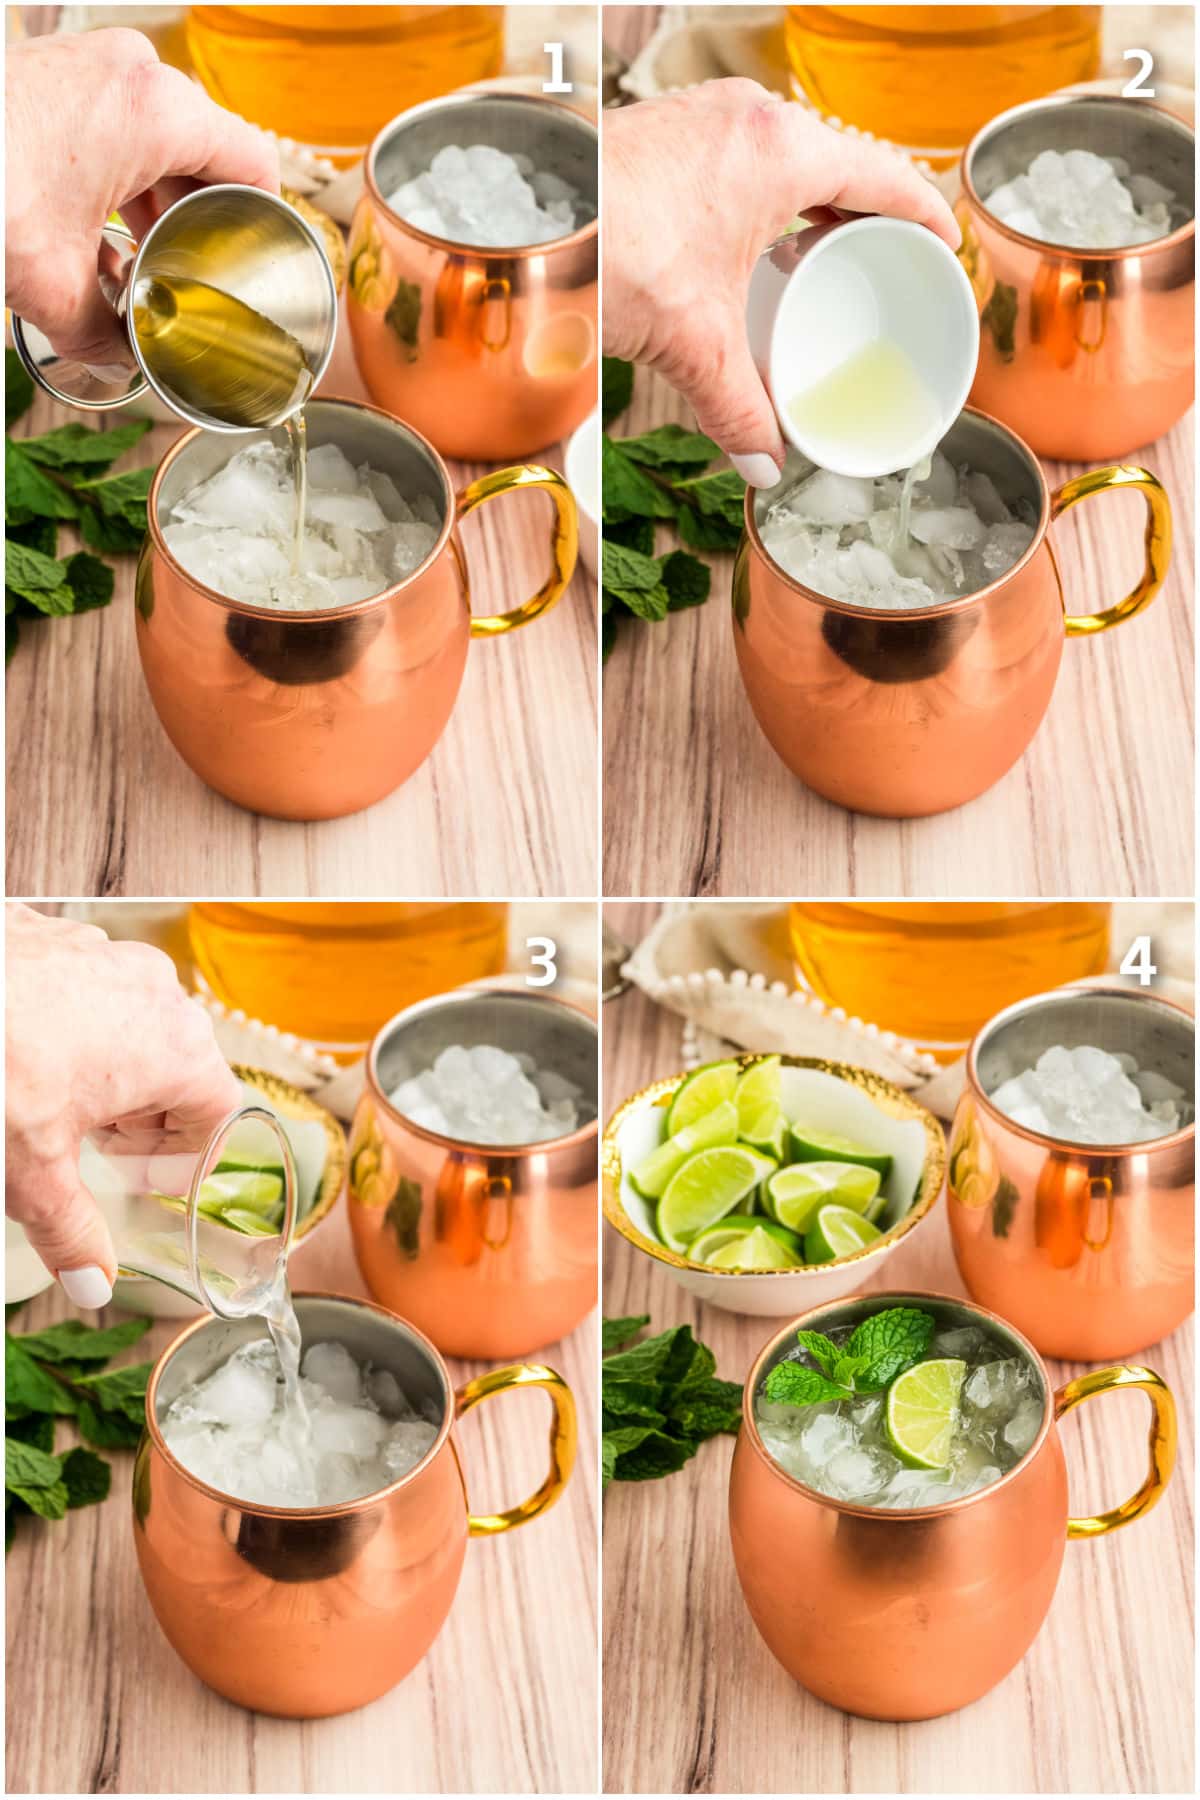 Whiskey, lime juice and ginger beer being poured into a copper cup.